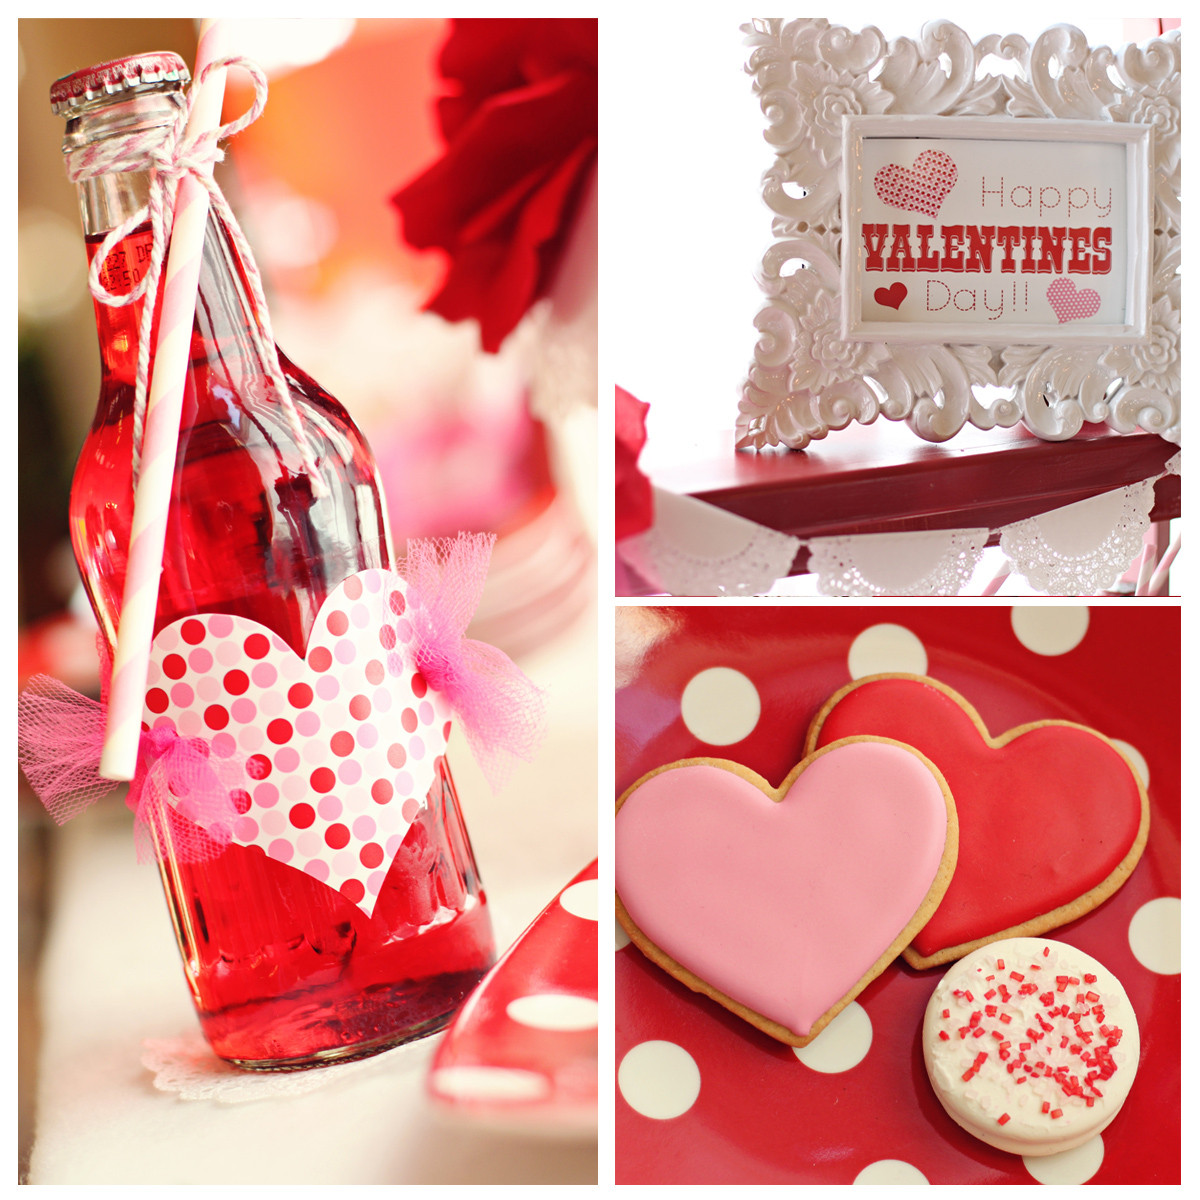 Valentines Birthday Gift Ideas
 Amanda s Parties To Go Valentines Party Table Ideas